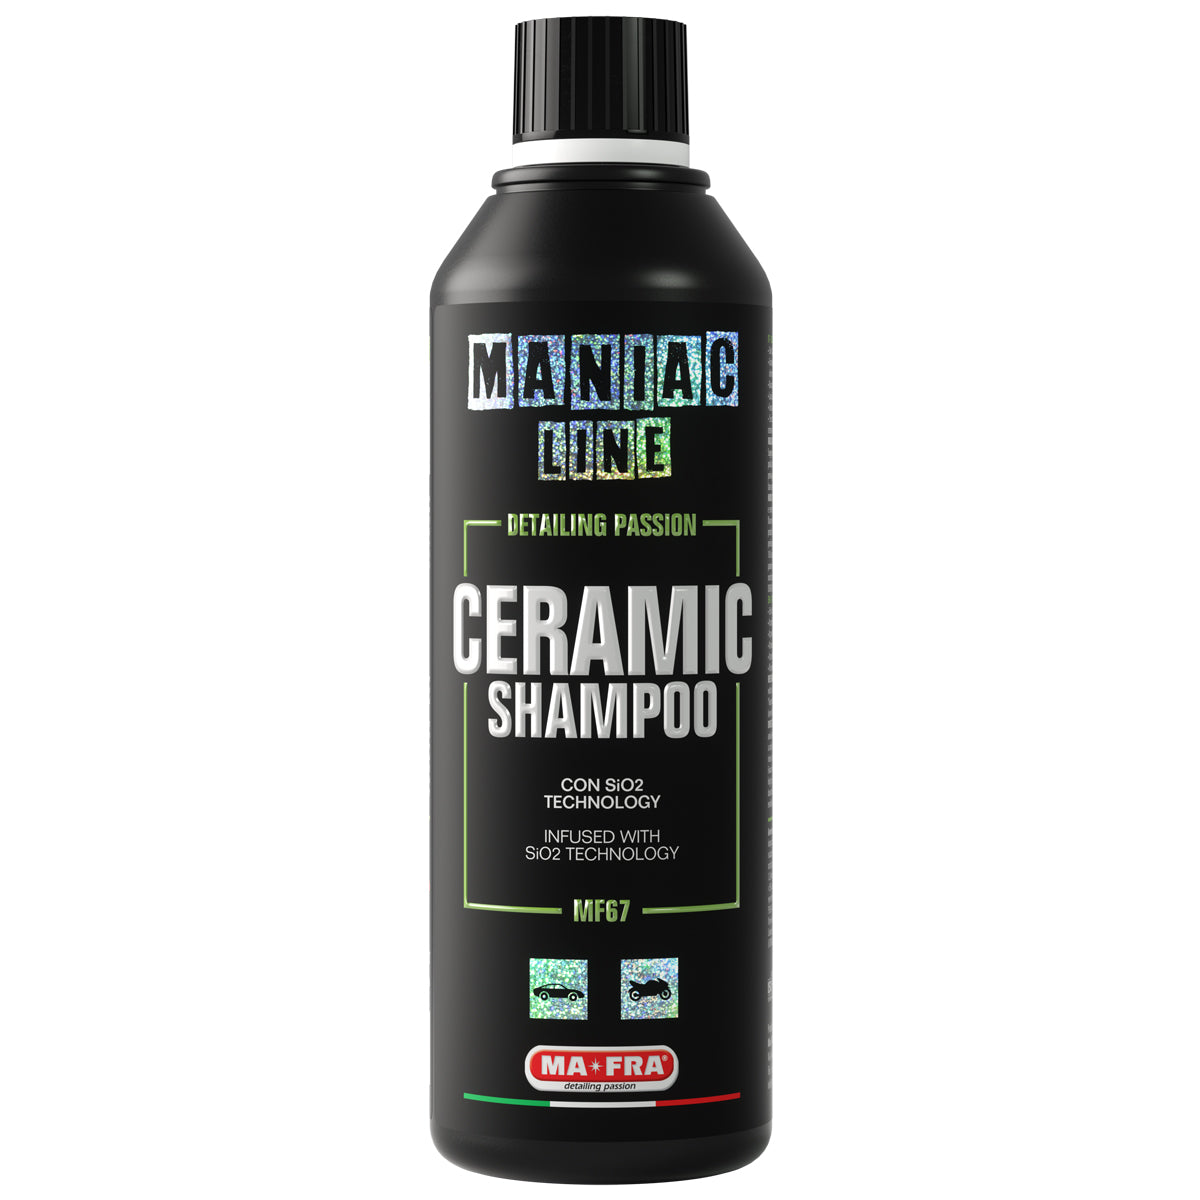 Maniac Ceramic Shampoo with SiO2 technology provides a hydrophobic coating that allows you to keep the car cleaner for longer. Ma Fra Ireland, Maniac Line Ireland